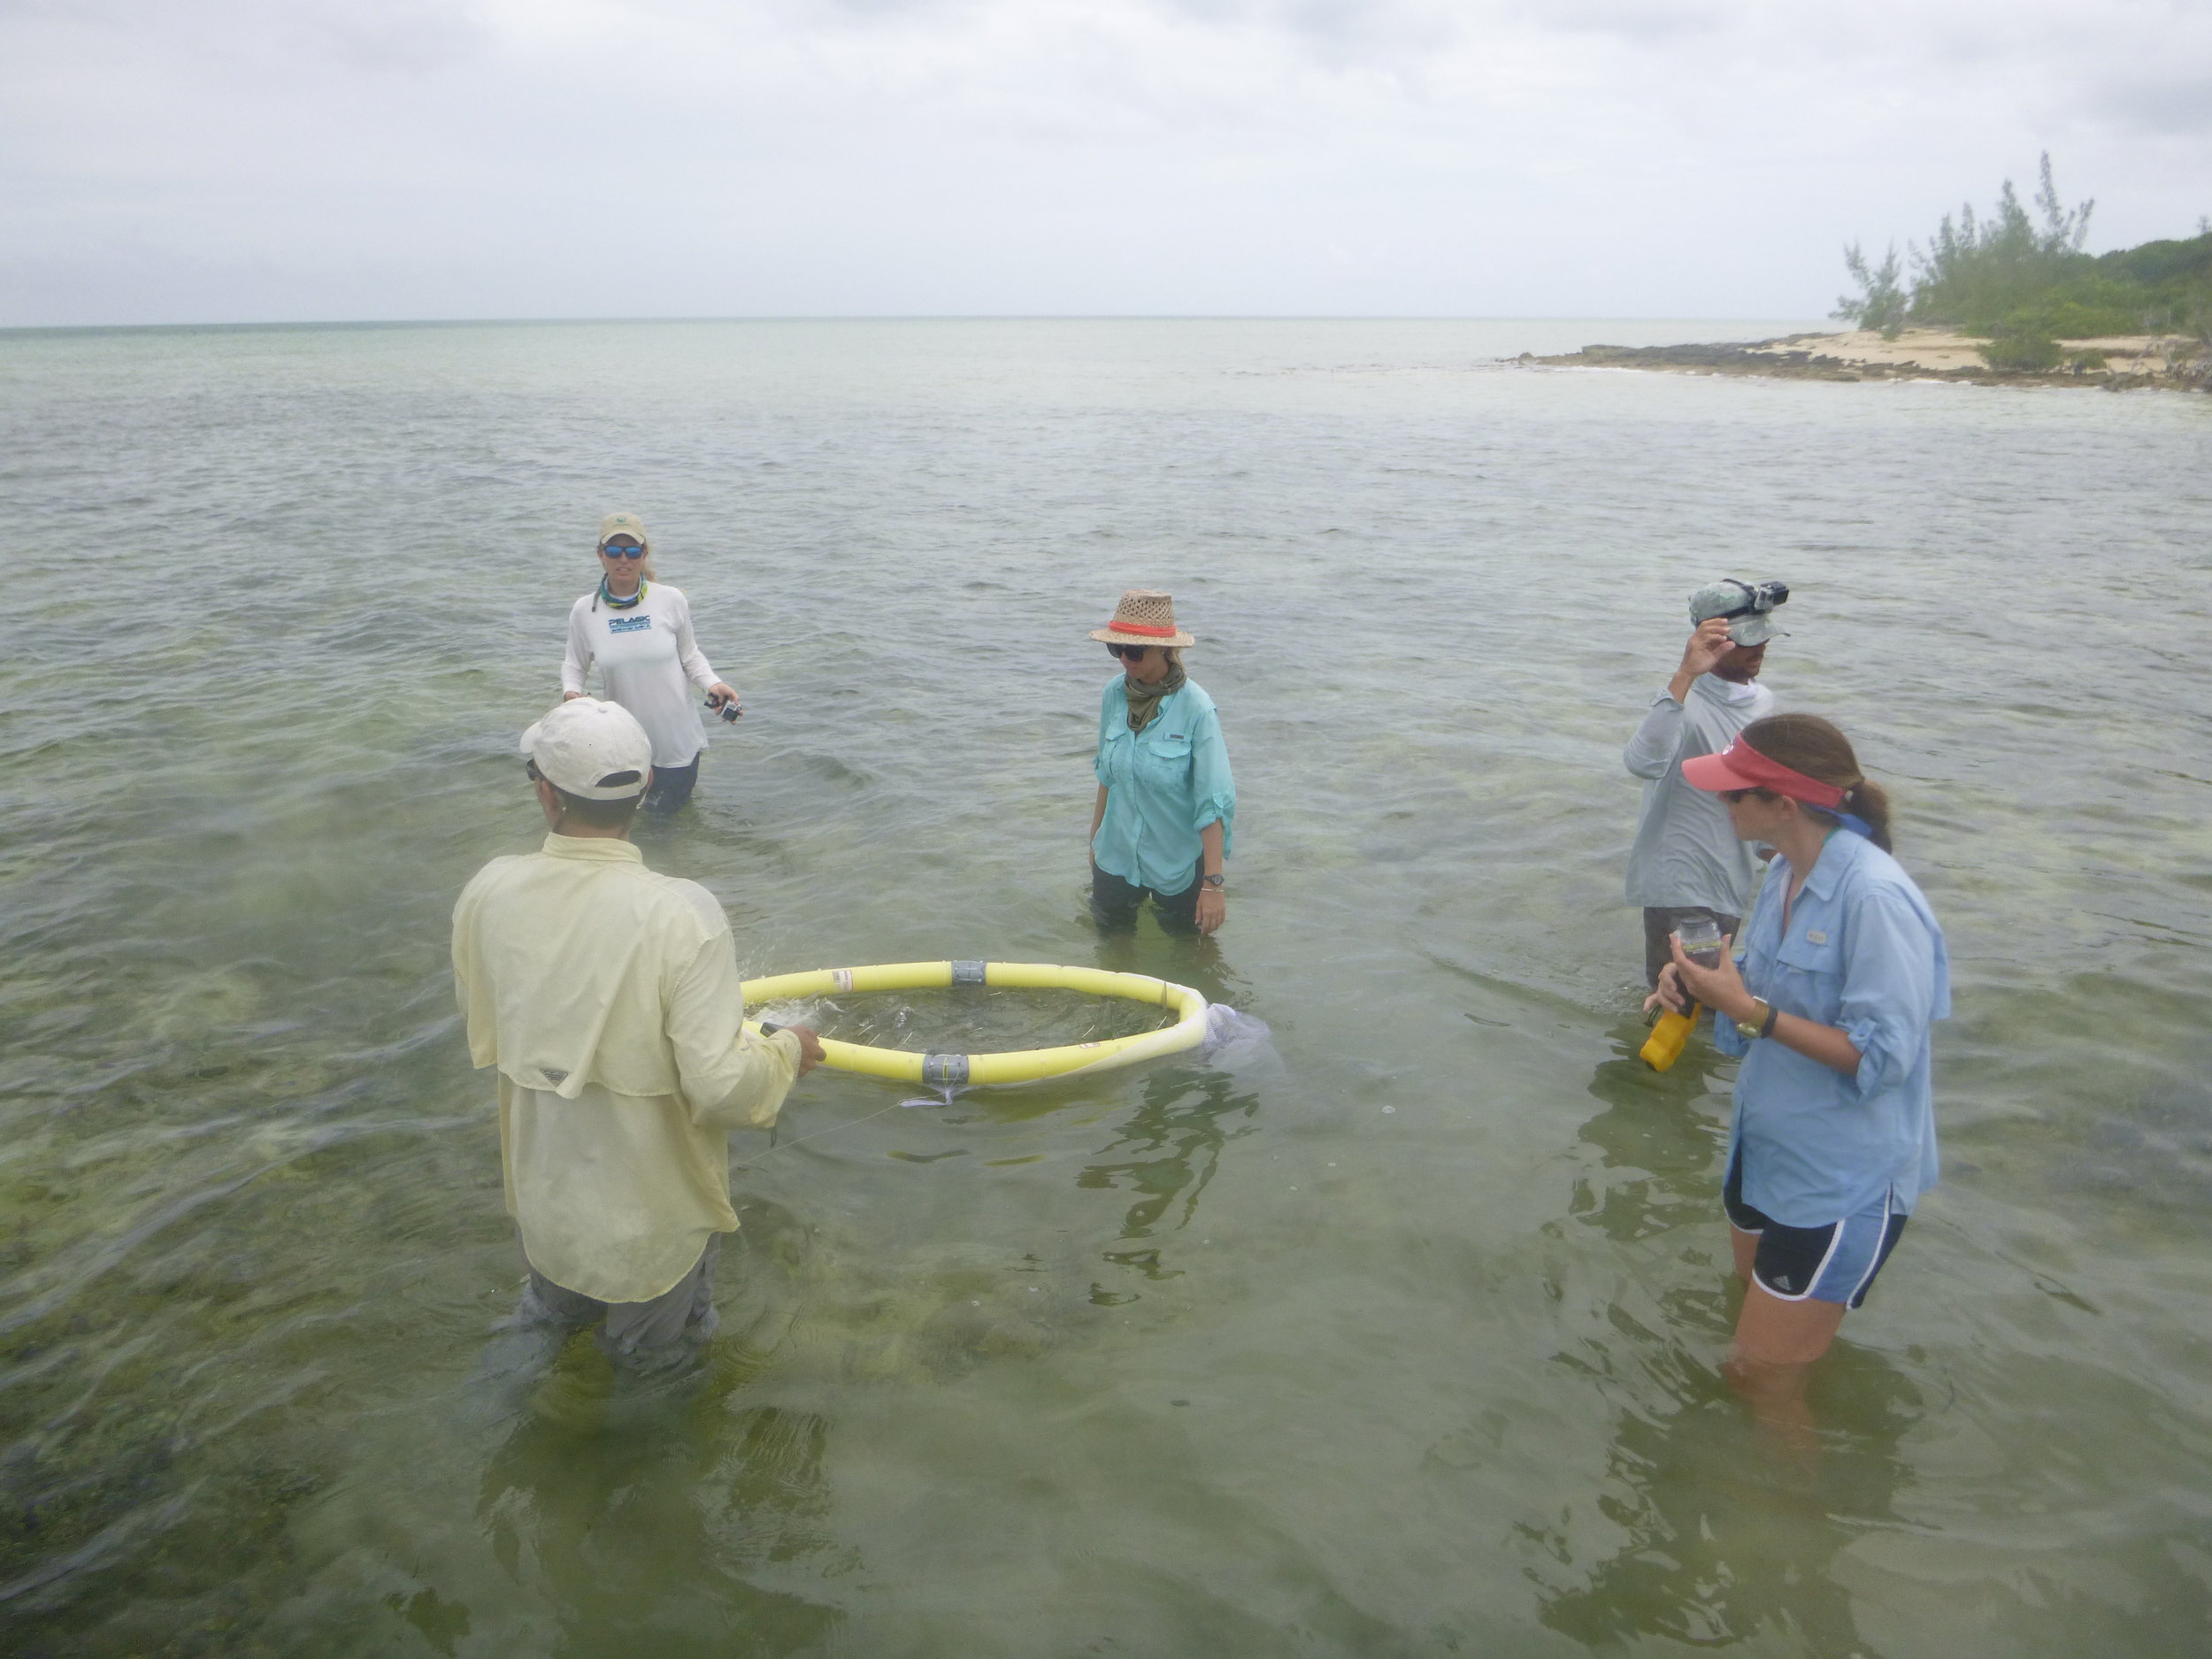 Catching bonefish with nets to tag and measure.